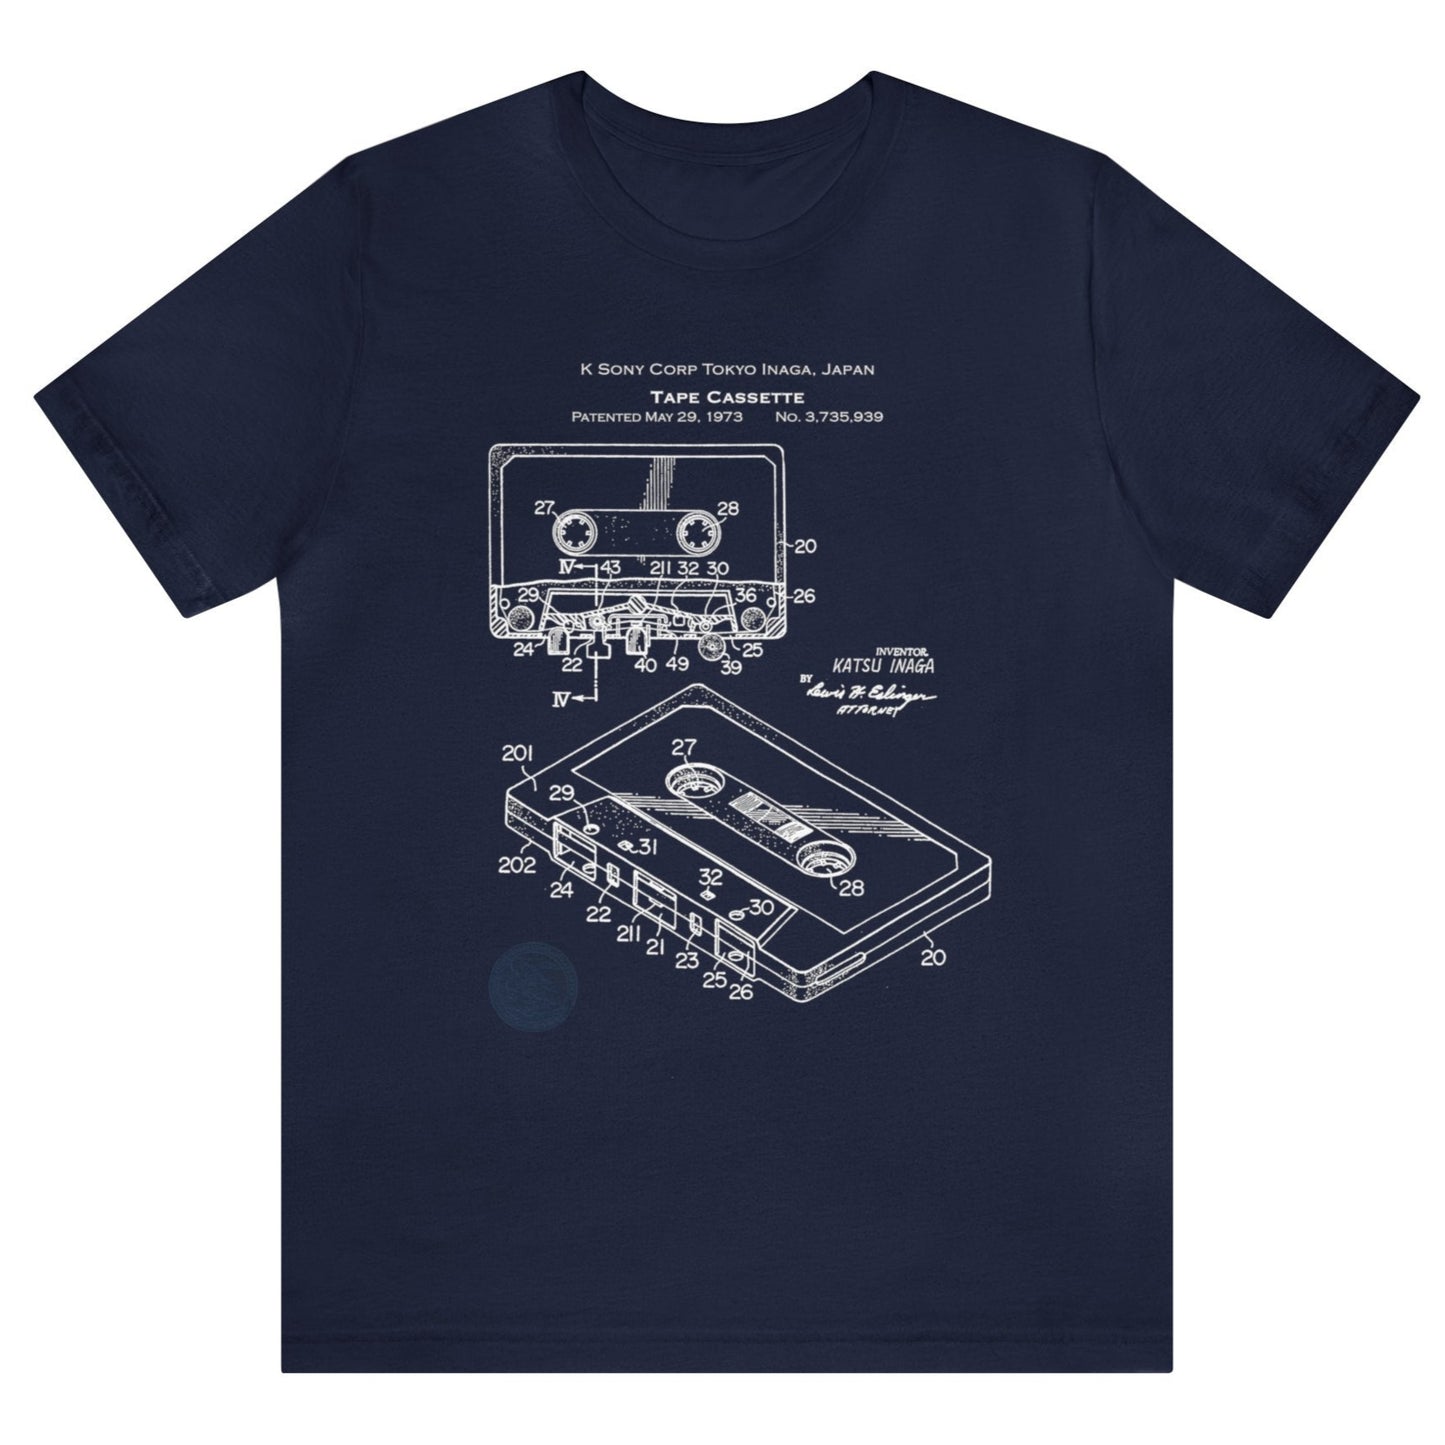 Music Cassette Tape U.S. Patent Retro Blueprint, EXPRESS DELIVERY, Dark Unisex Bella+Canvas 3001 Tee, Express Shipping, Gift for Music Nerds and Audiophiles, 1973